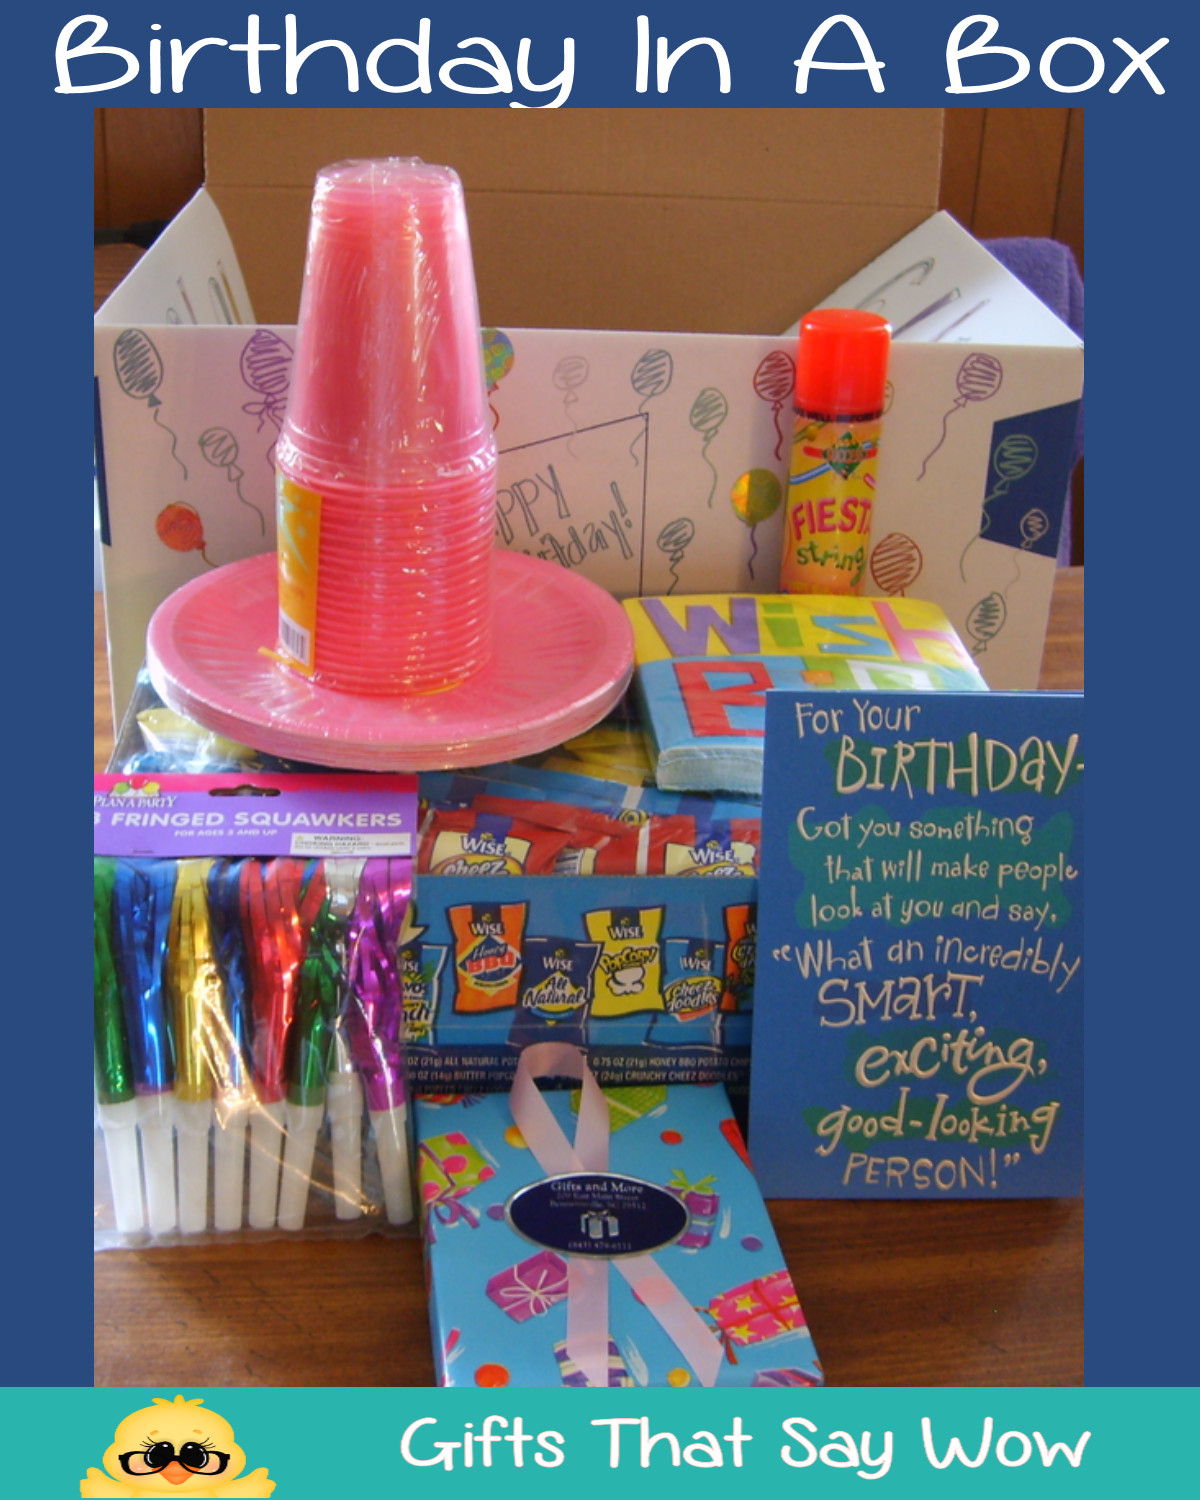 Birthday Box Gift Ideas
 GIFTS THAT SAY WOW Fun Crafts and Gift Ideas Ideas for